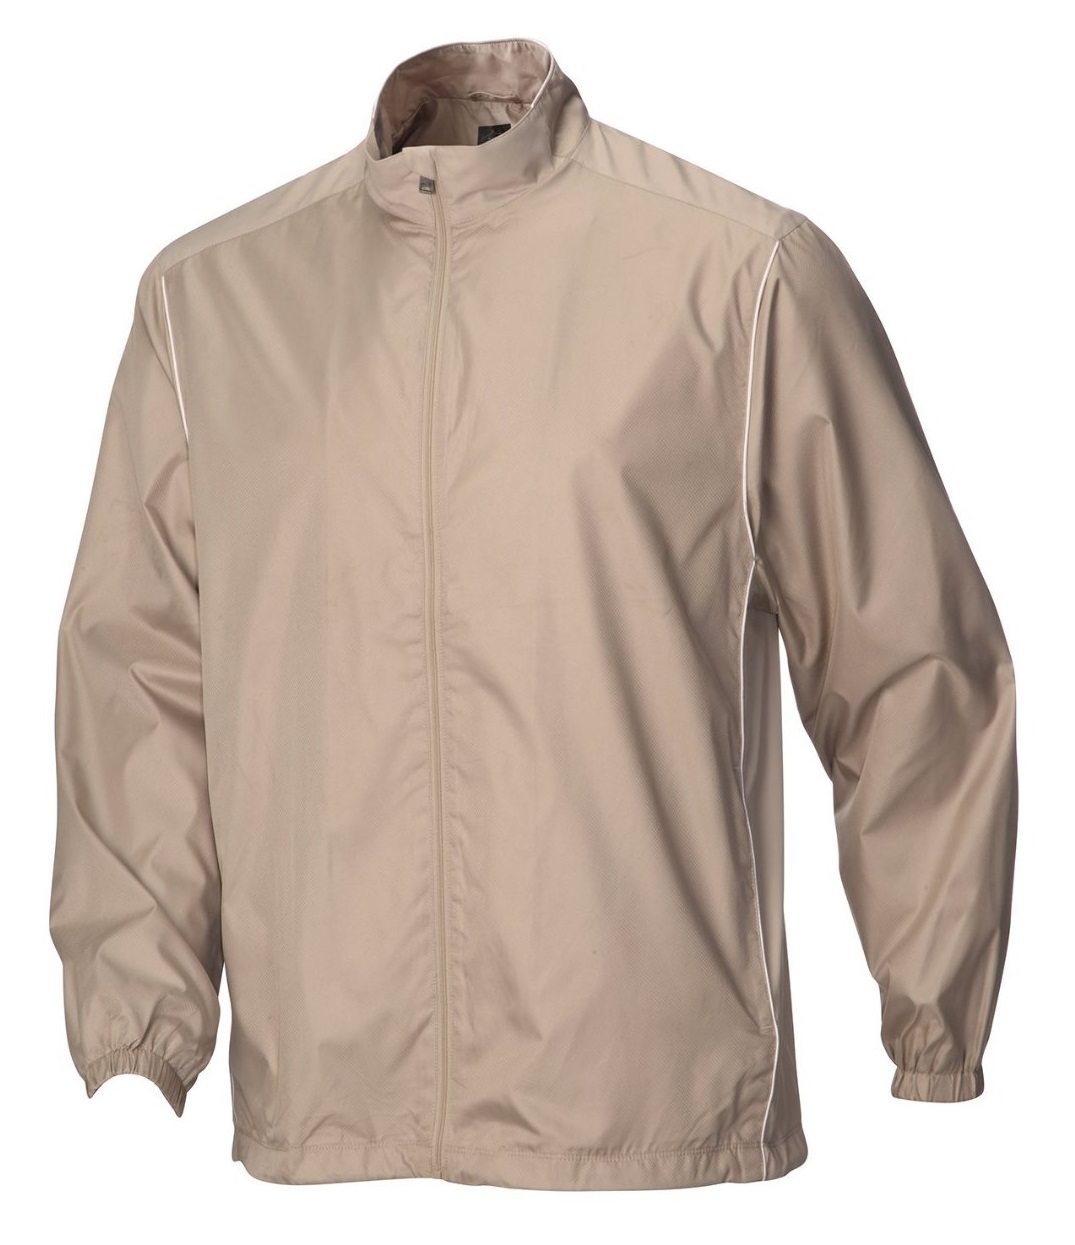 Mens Water Resistant Performance Golf Jackets